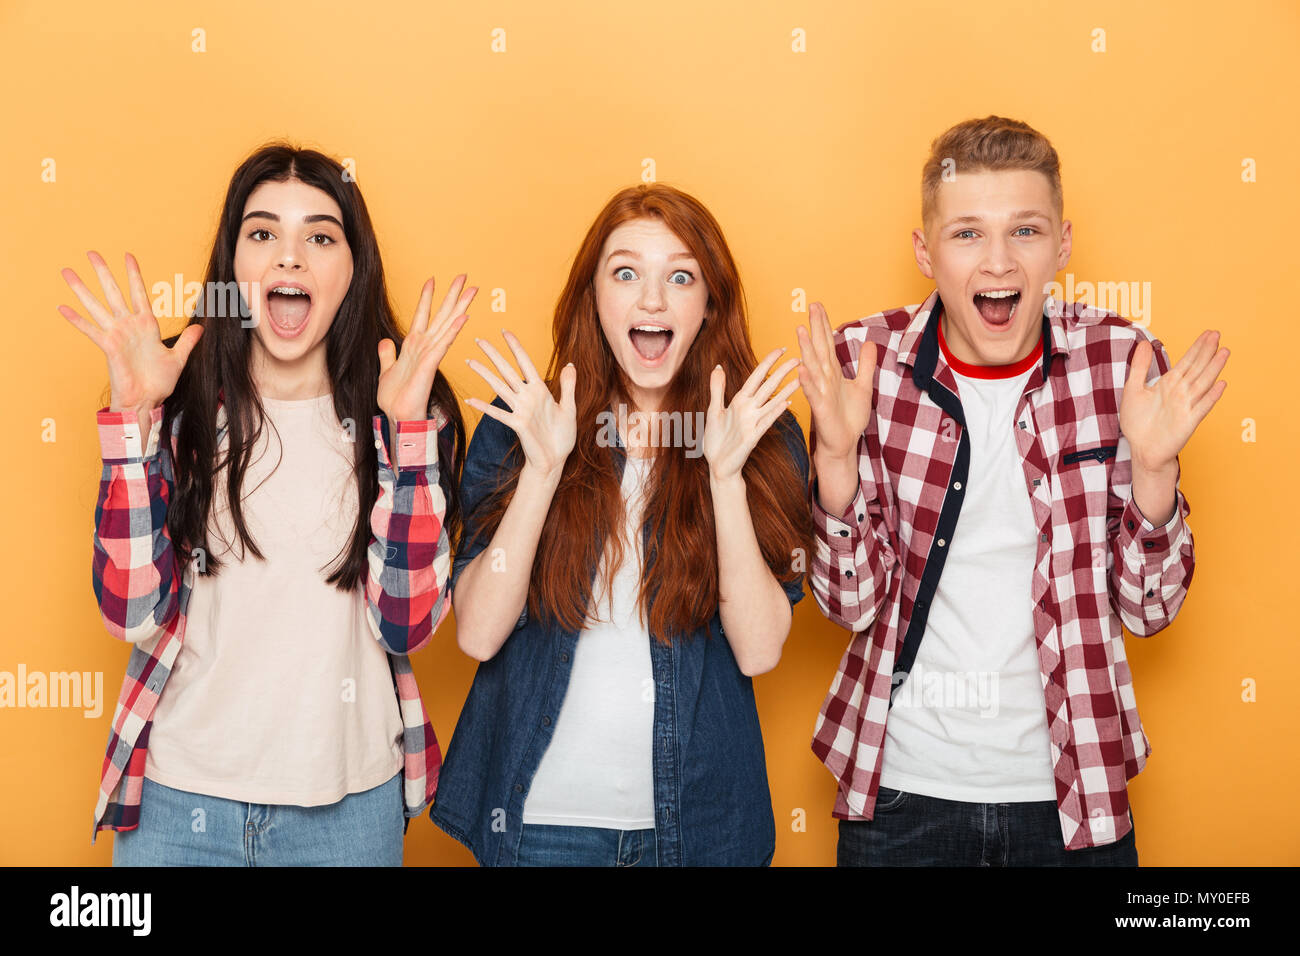 Group of surprised school friends screaming while standing together over yellow background Stock Photo